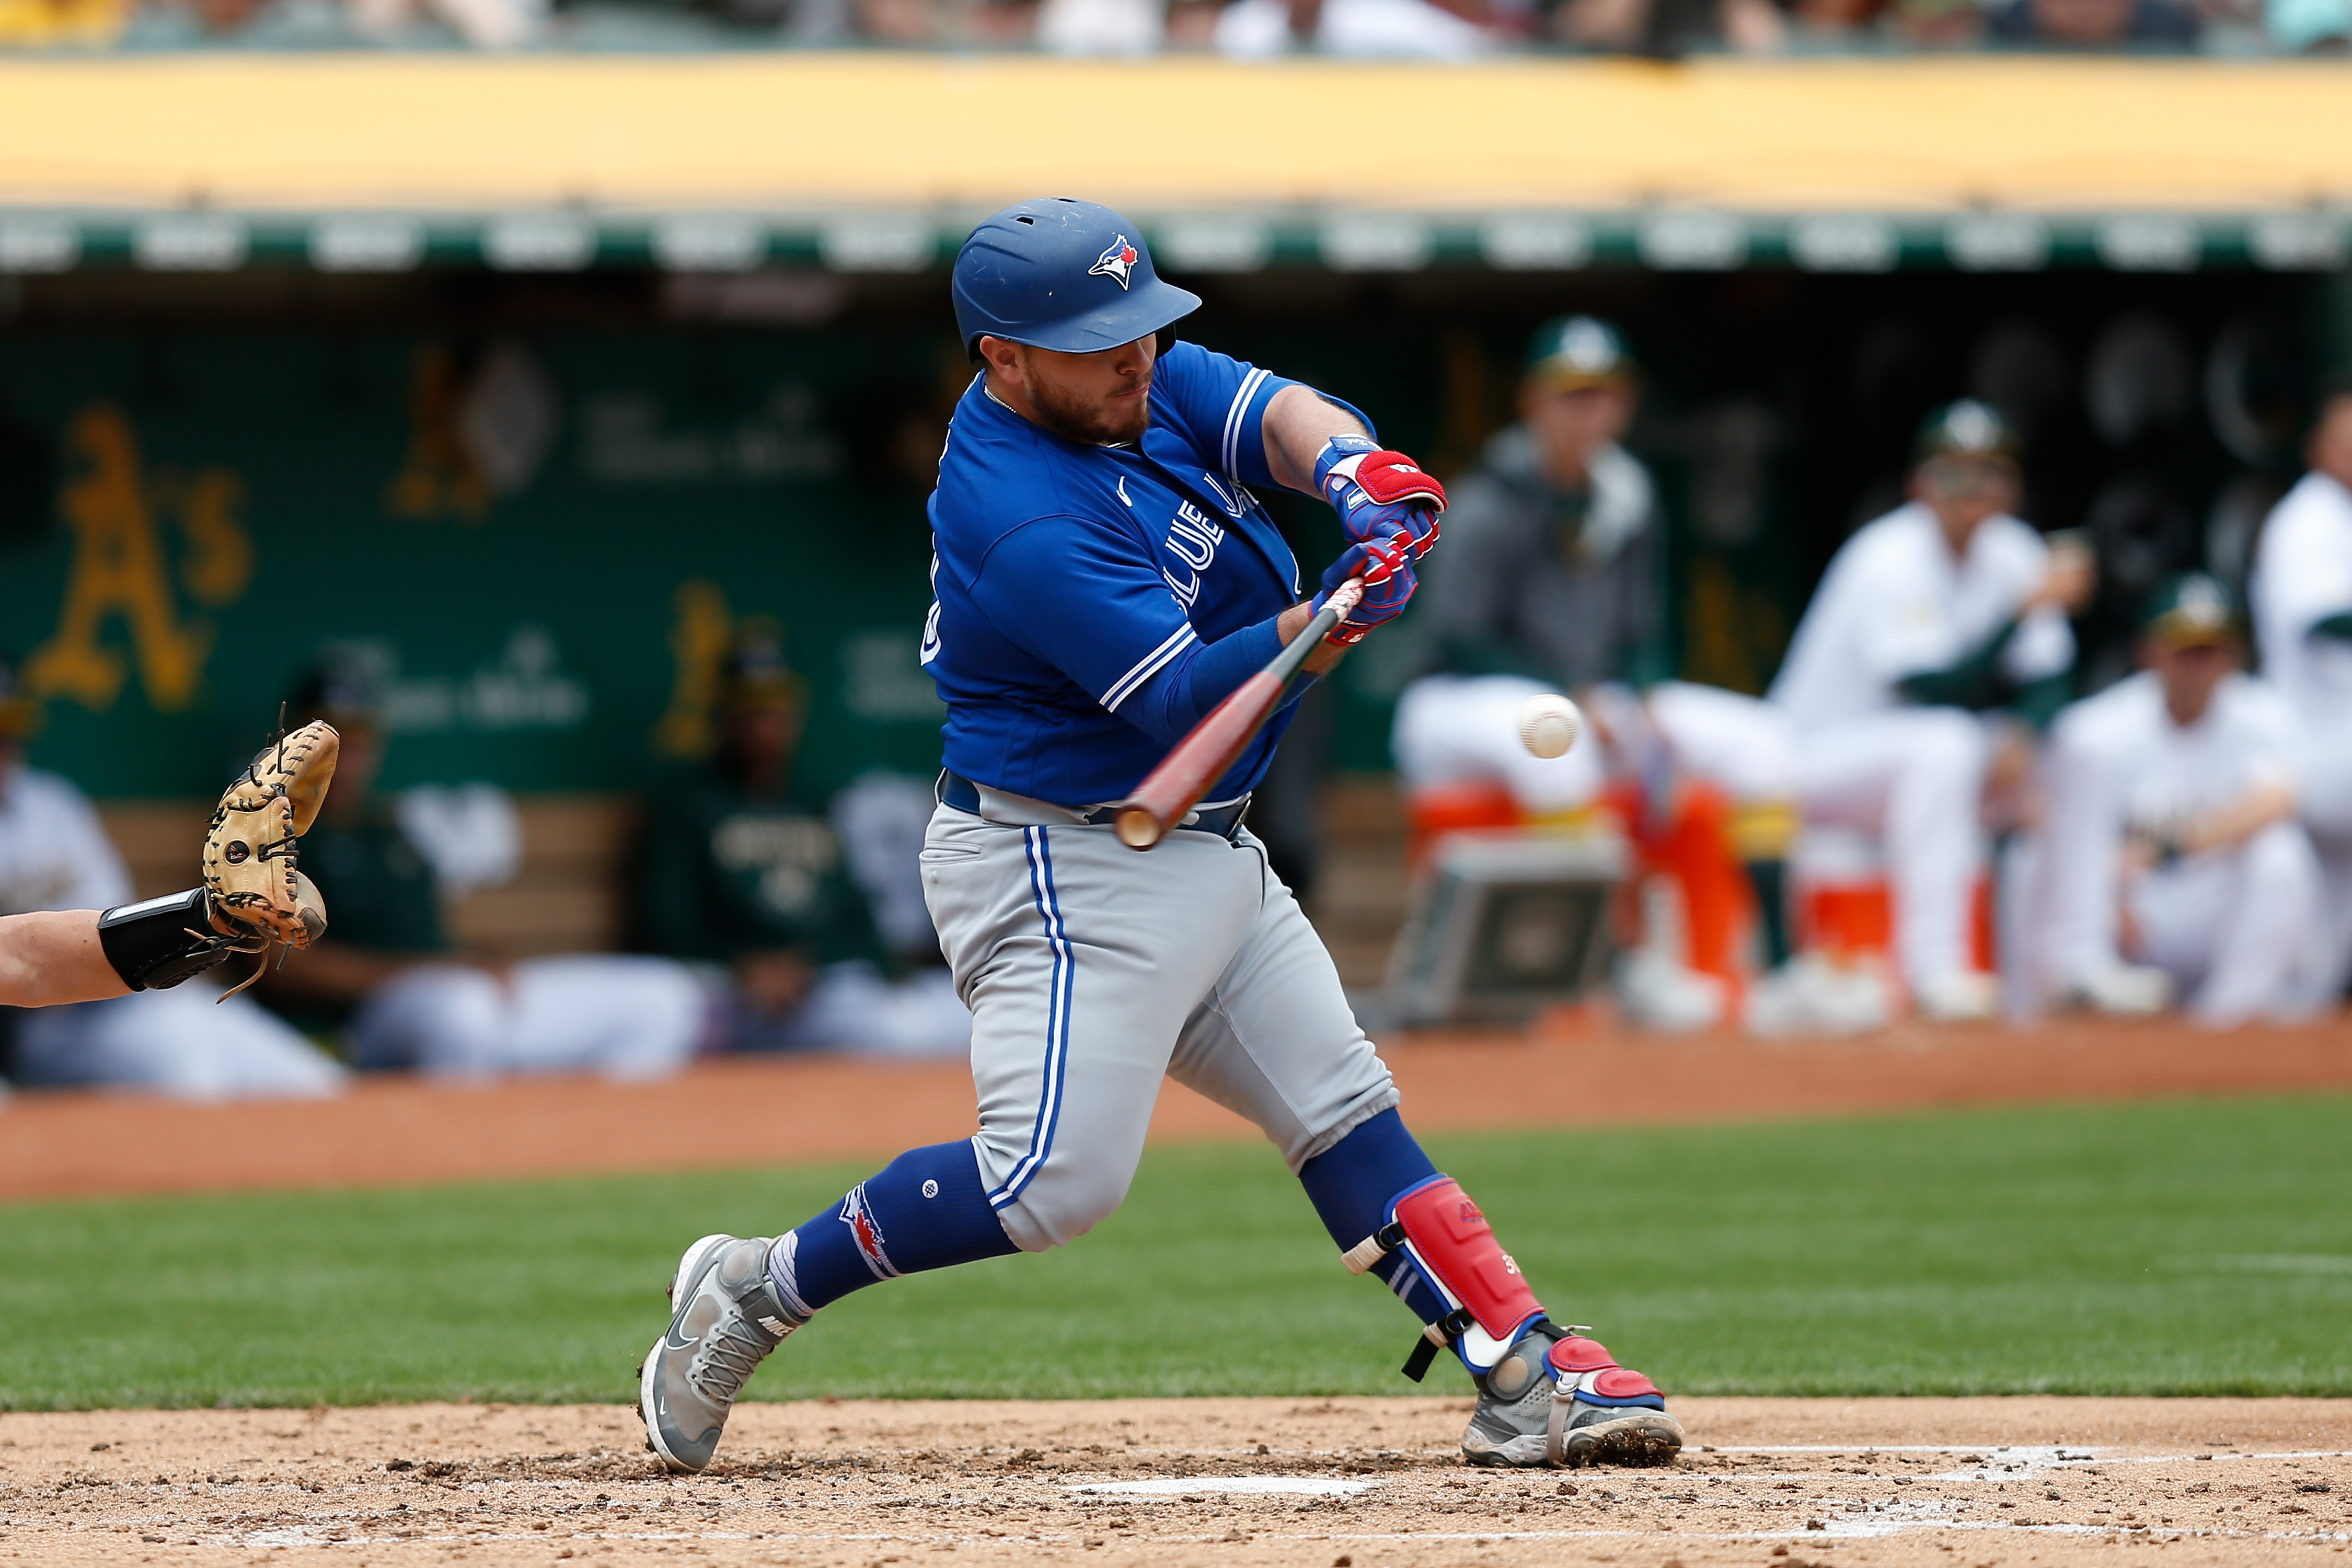 MLB News: Julio Urias leads Mexico's MLB star studded roster that